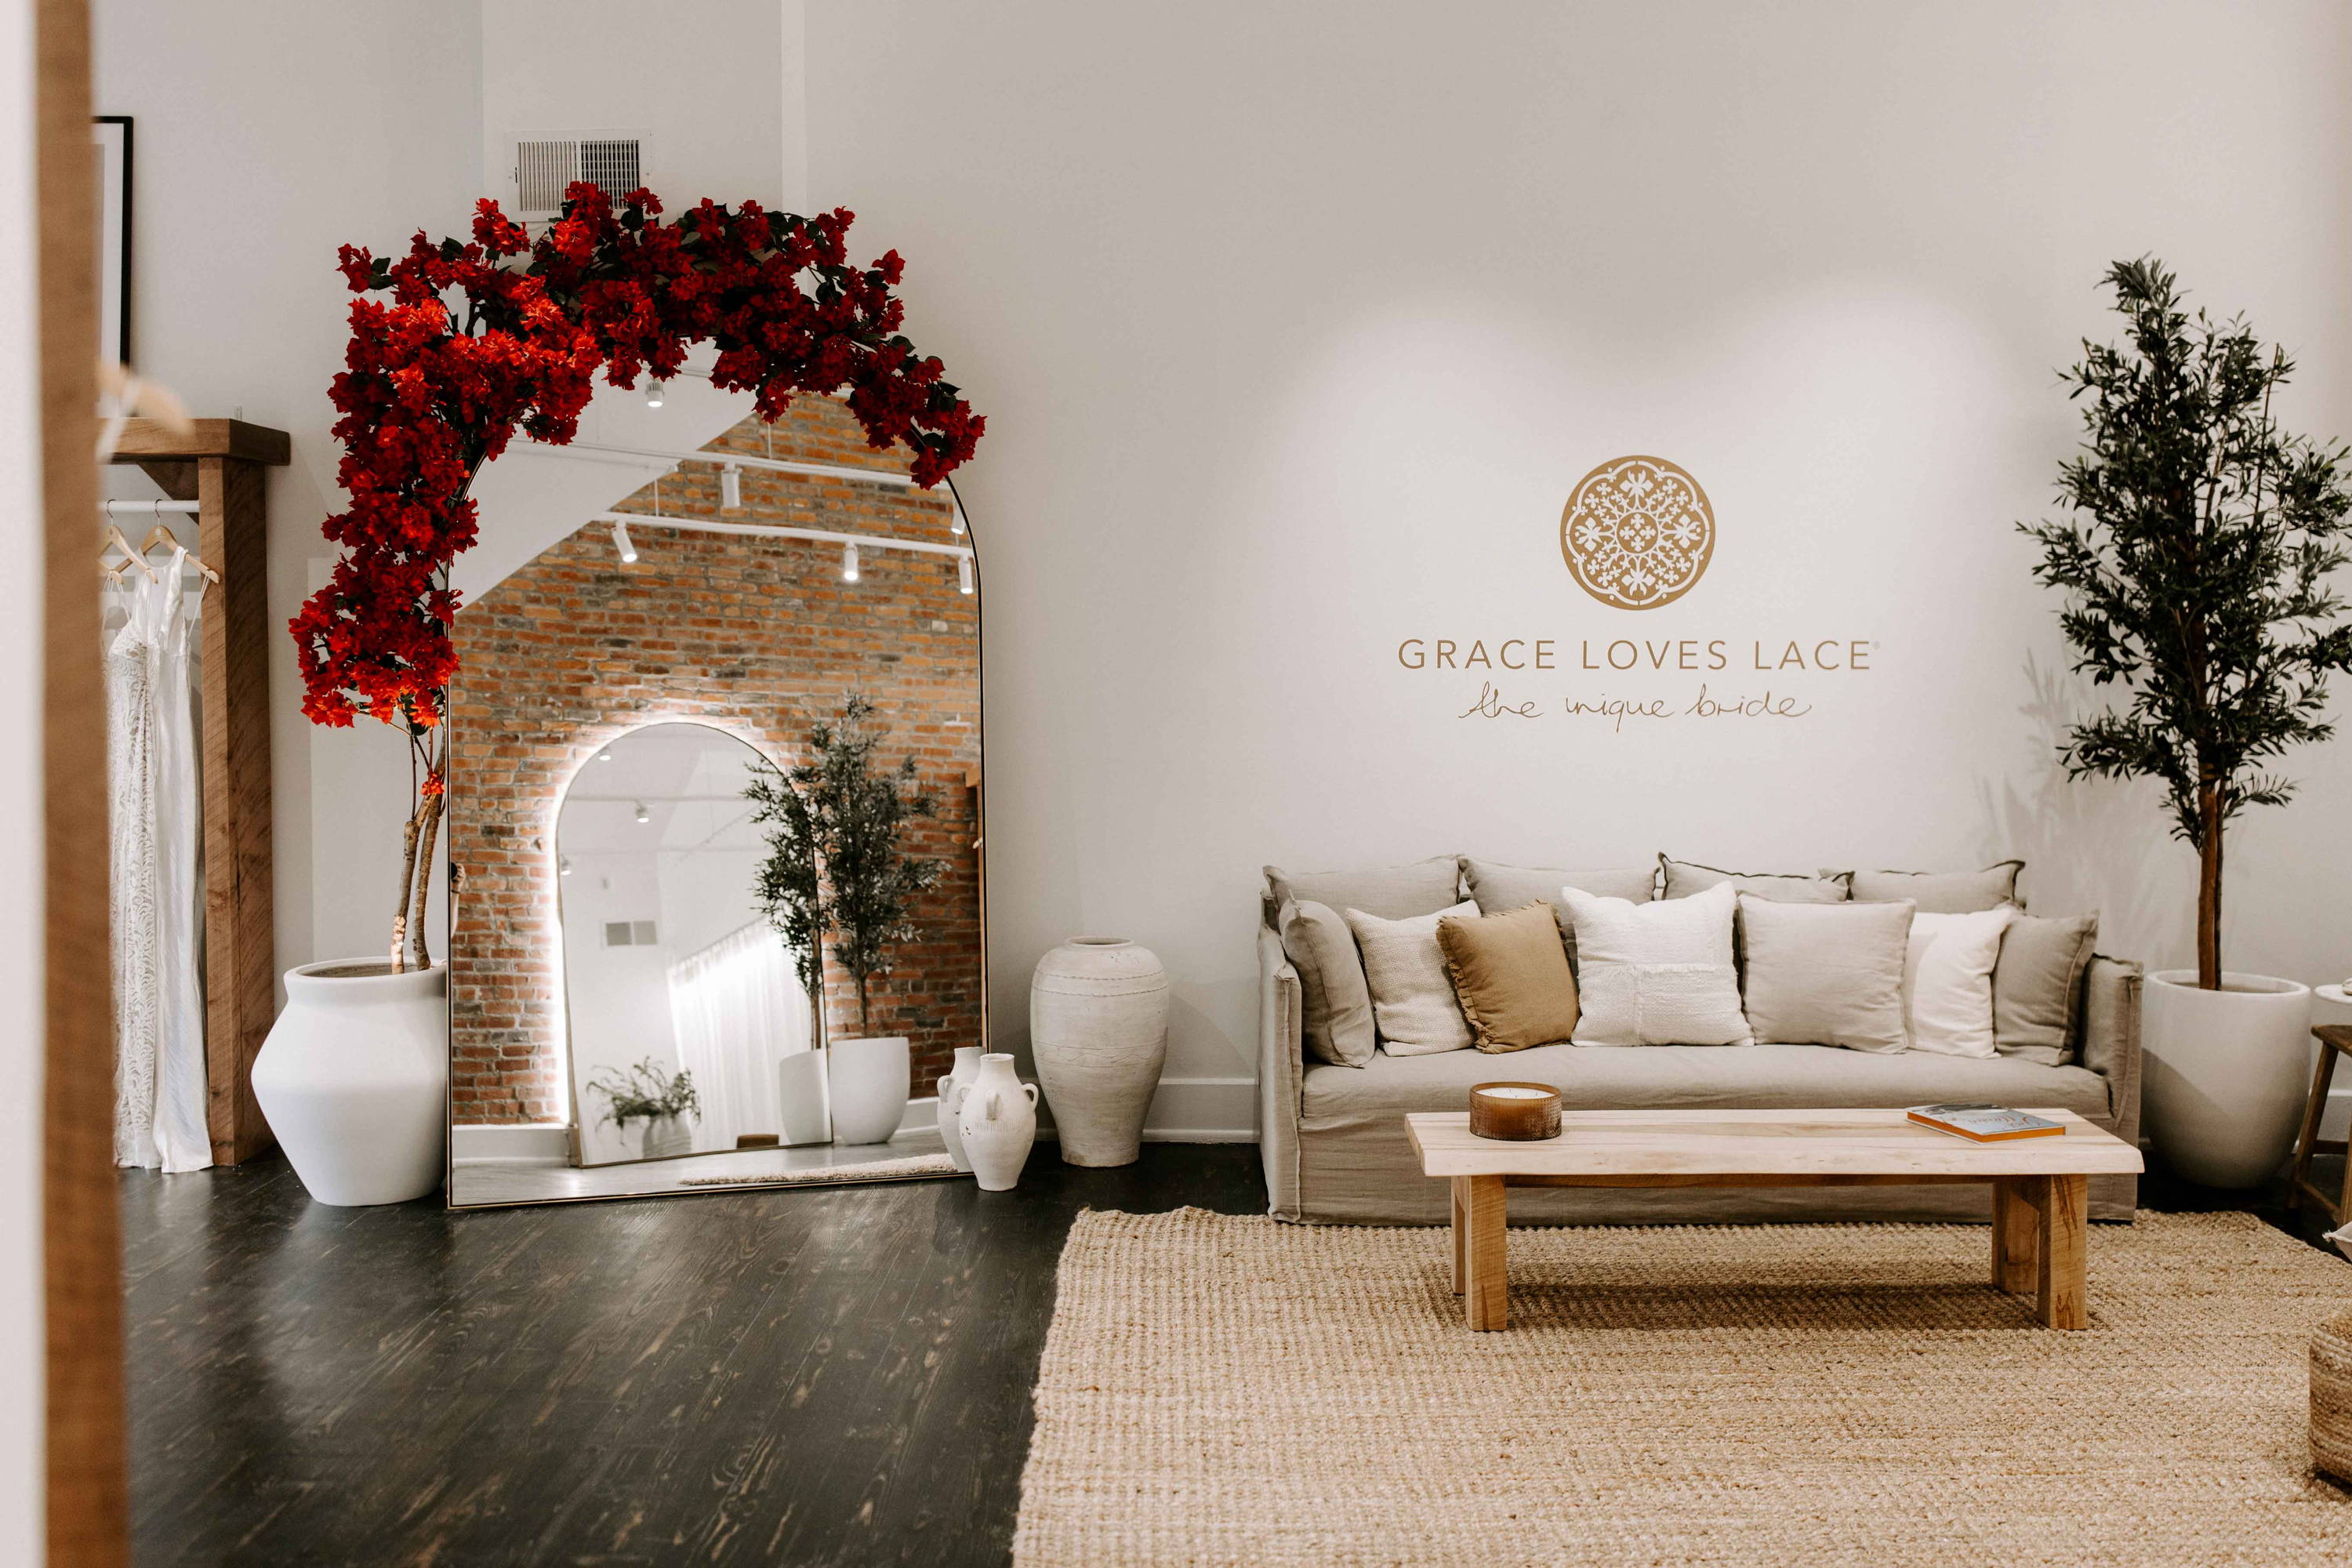 Beige couch, red floral arrangement featured on mirror and Grace Loves Lace logo on white wall